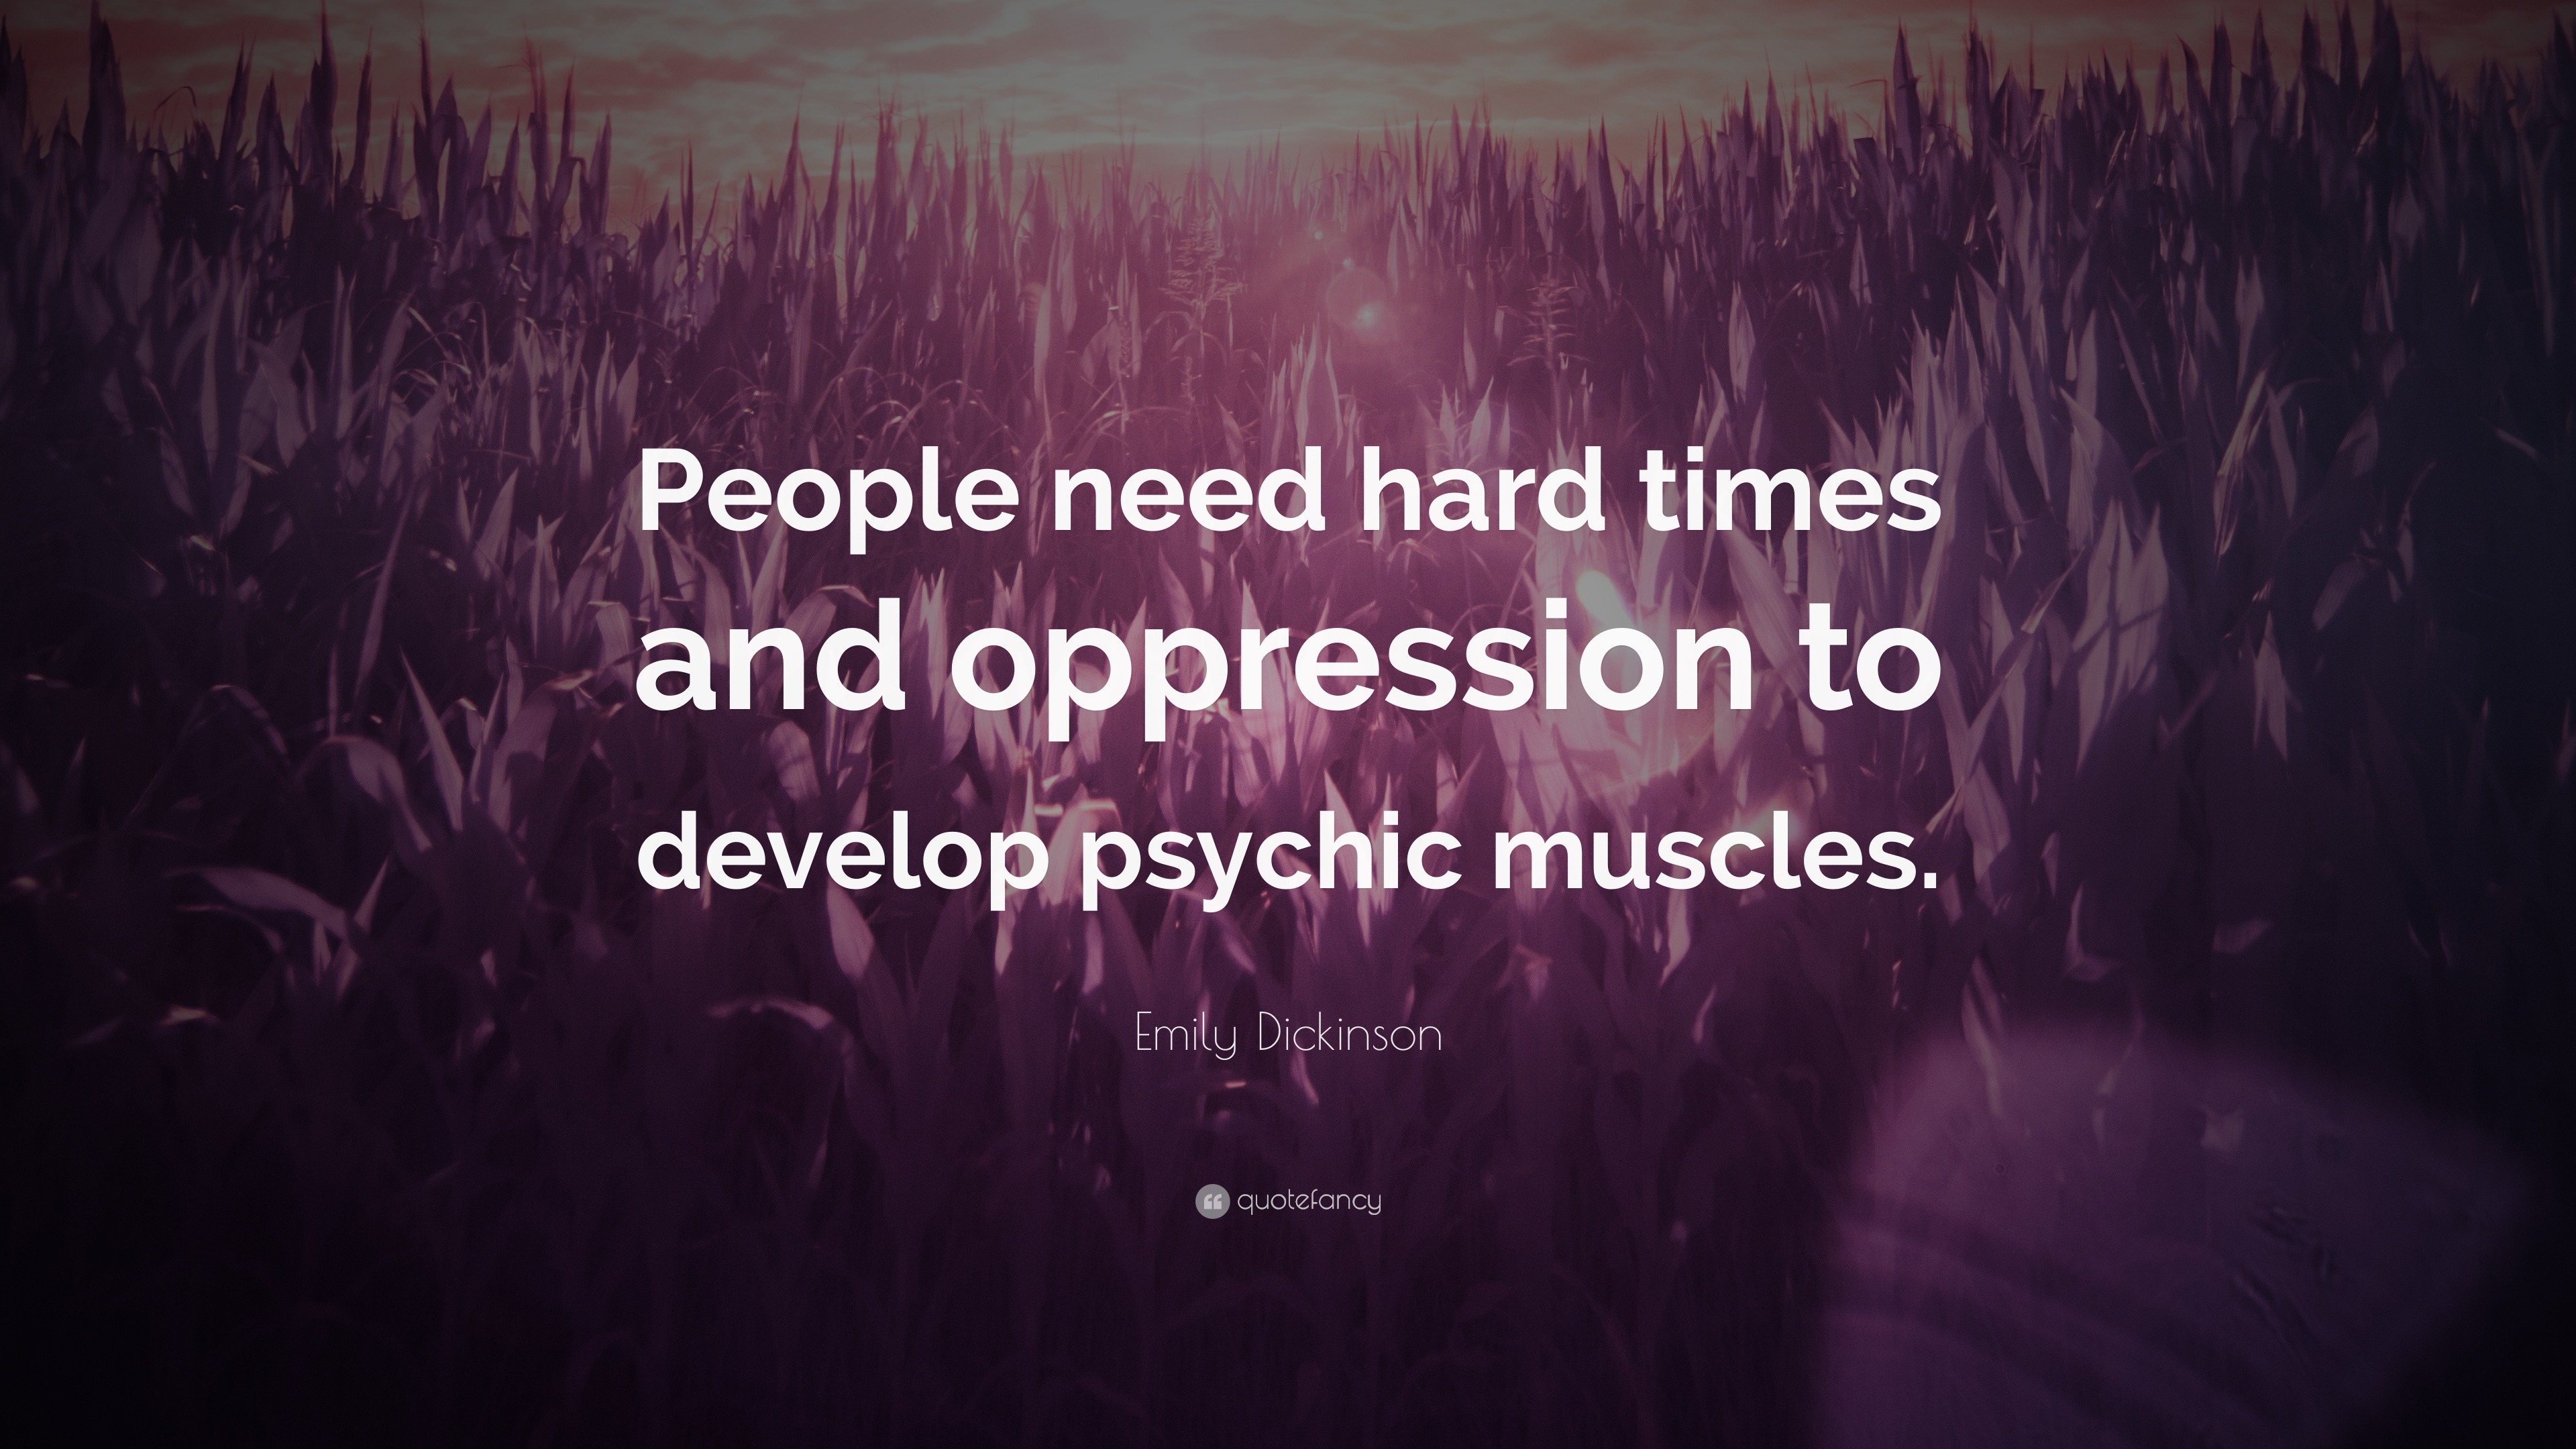 Emily Dickinson Quote “People need hard times and oppression to develop psychic muscles